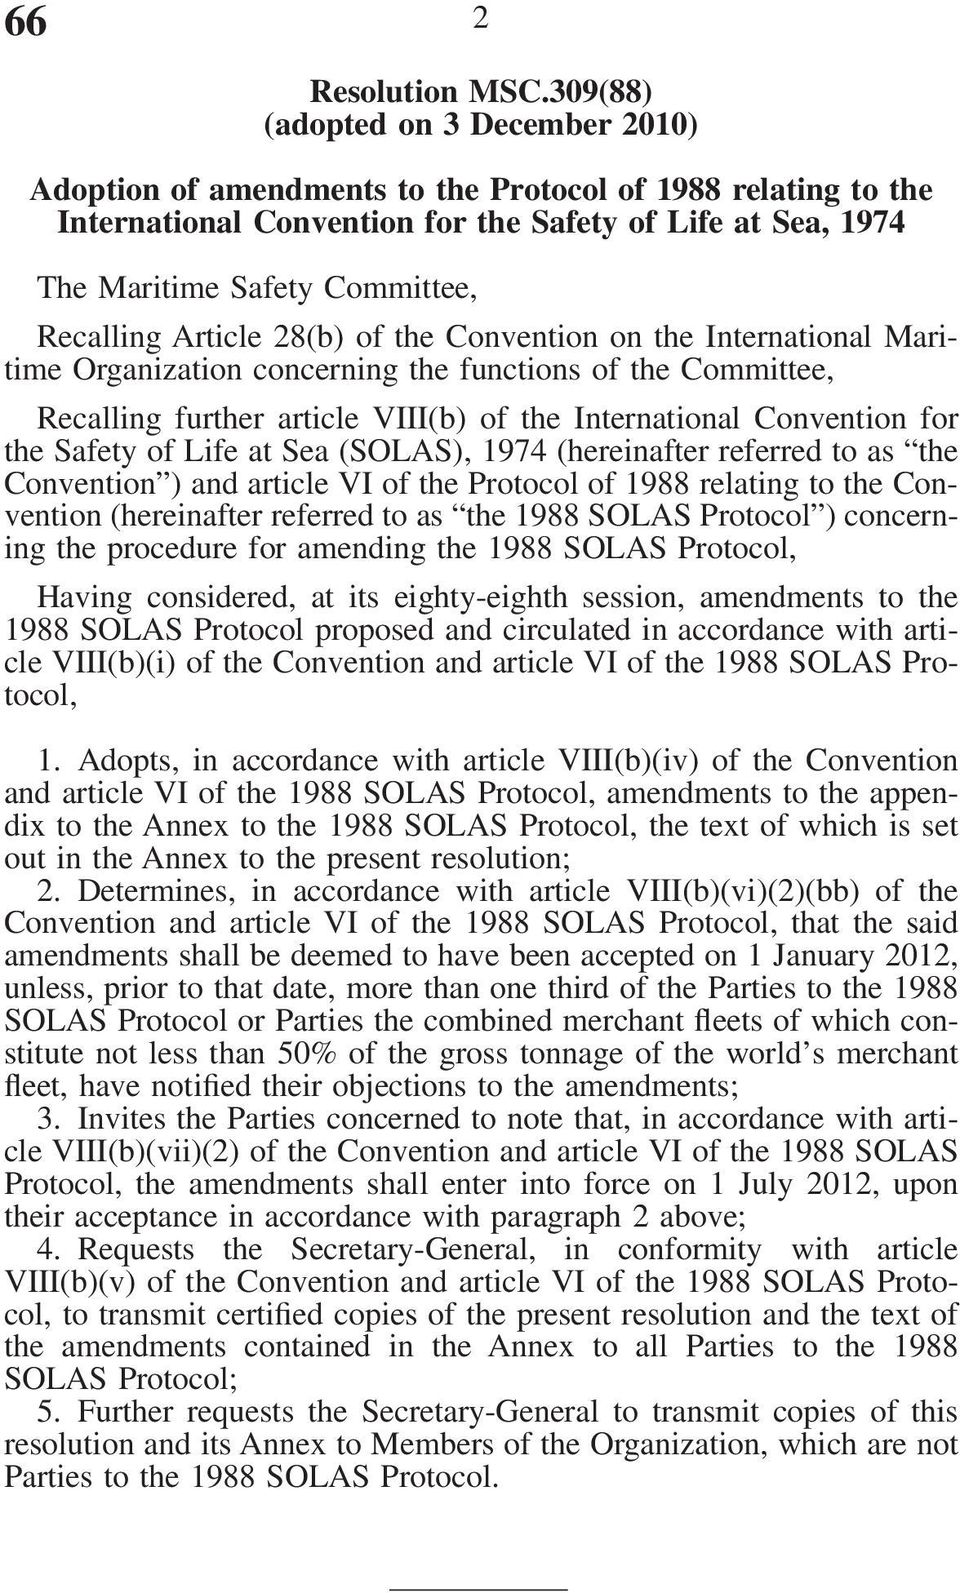 Recalling Article 28(b) of the Convention on the International Maritime Organization concerning the functions of the Committee, Recalling further article VIII(b) of the International Convention for